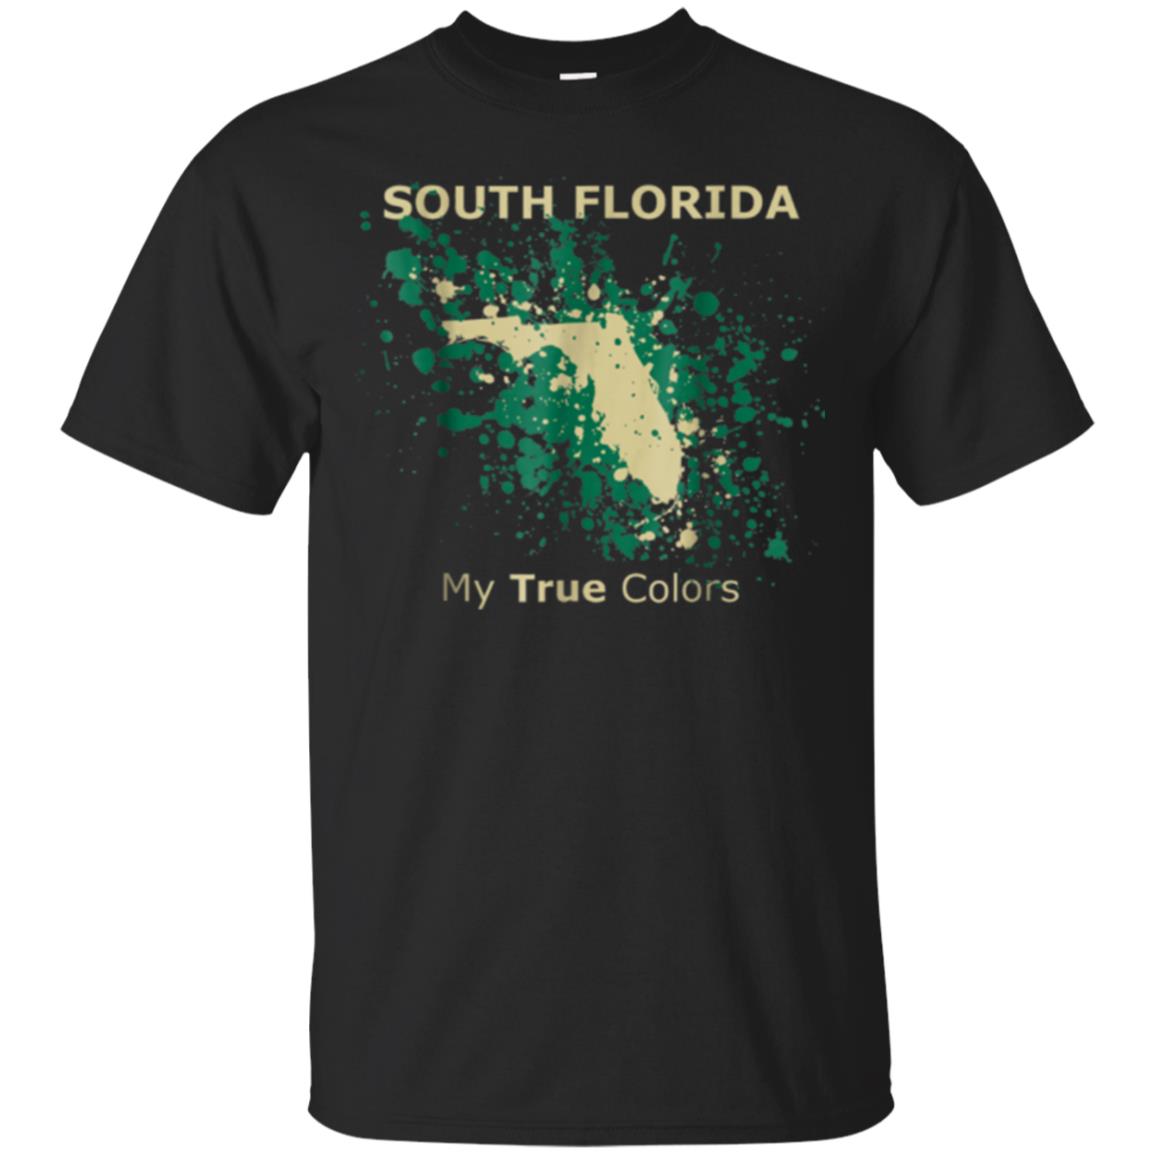 South Florida T Shirts- My True Colors